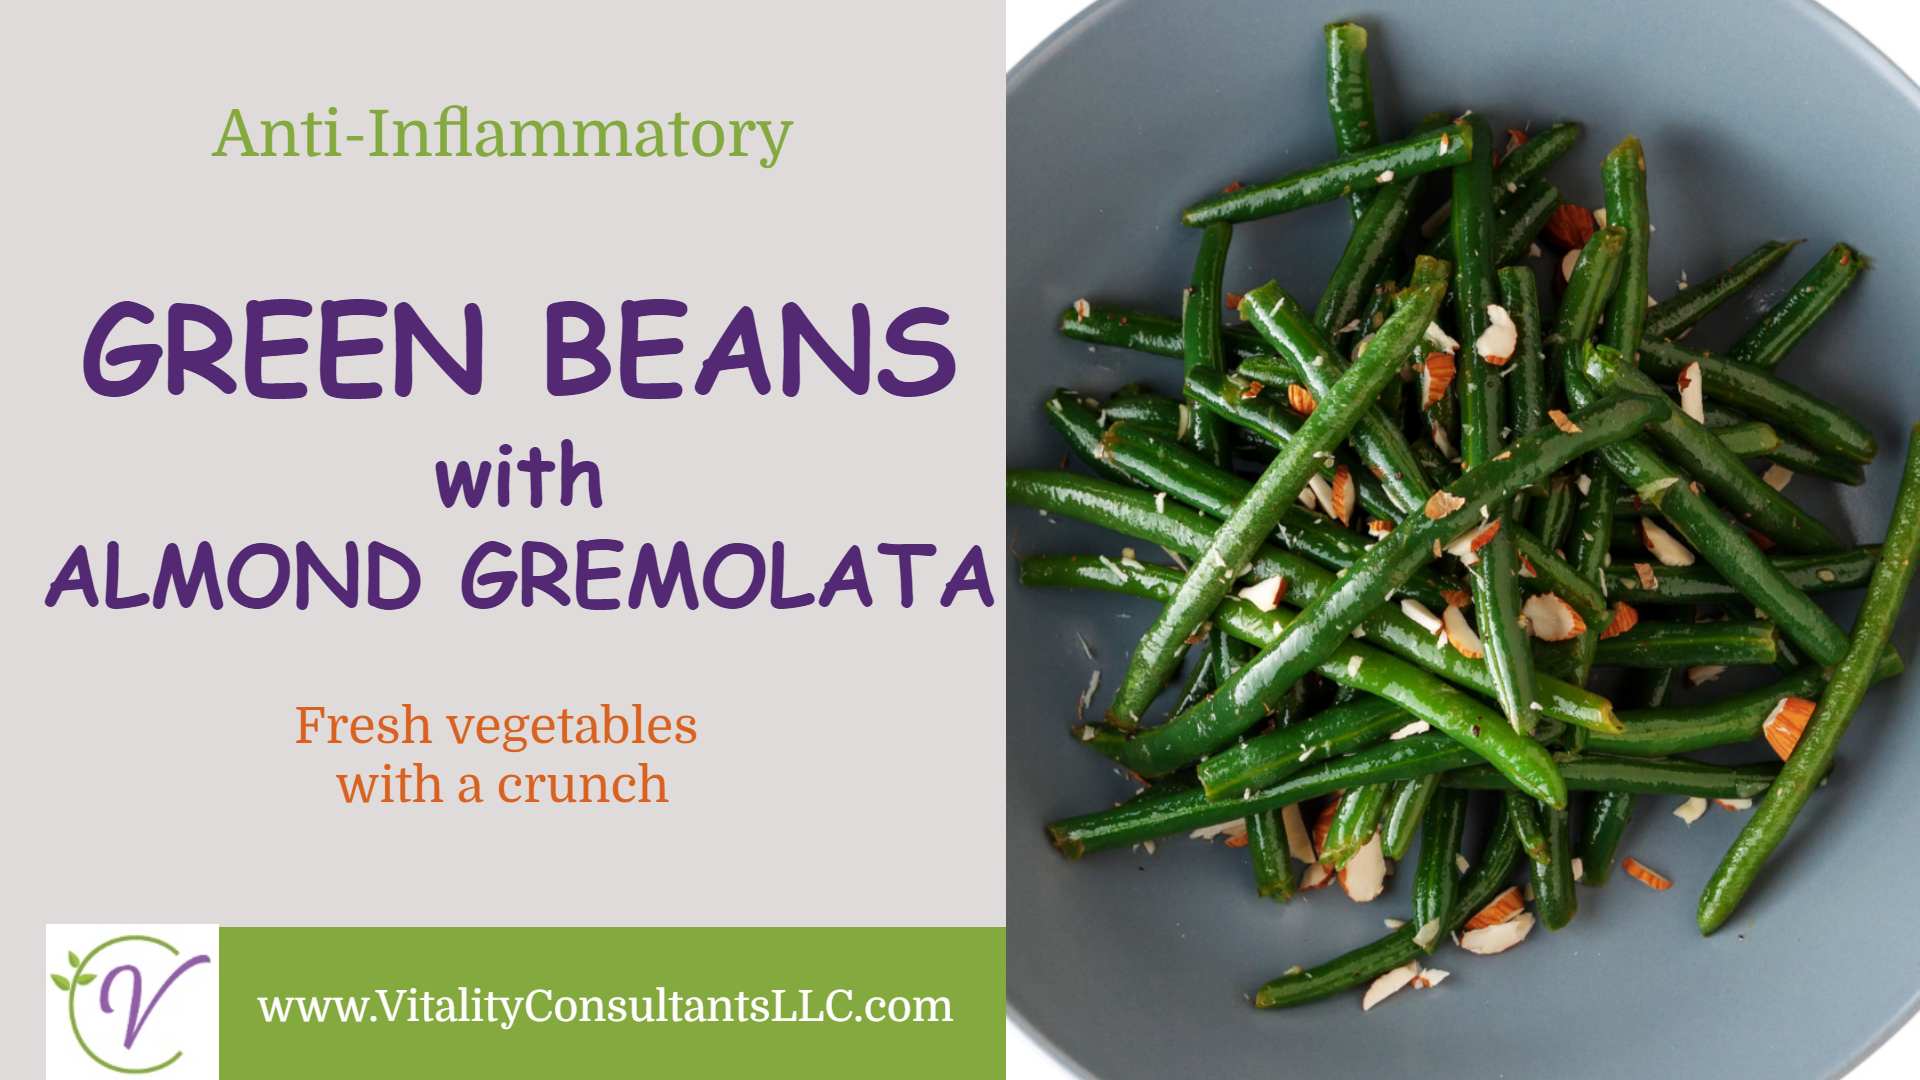 Green Beans with Almond Gremolata